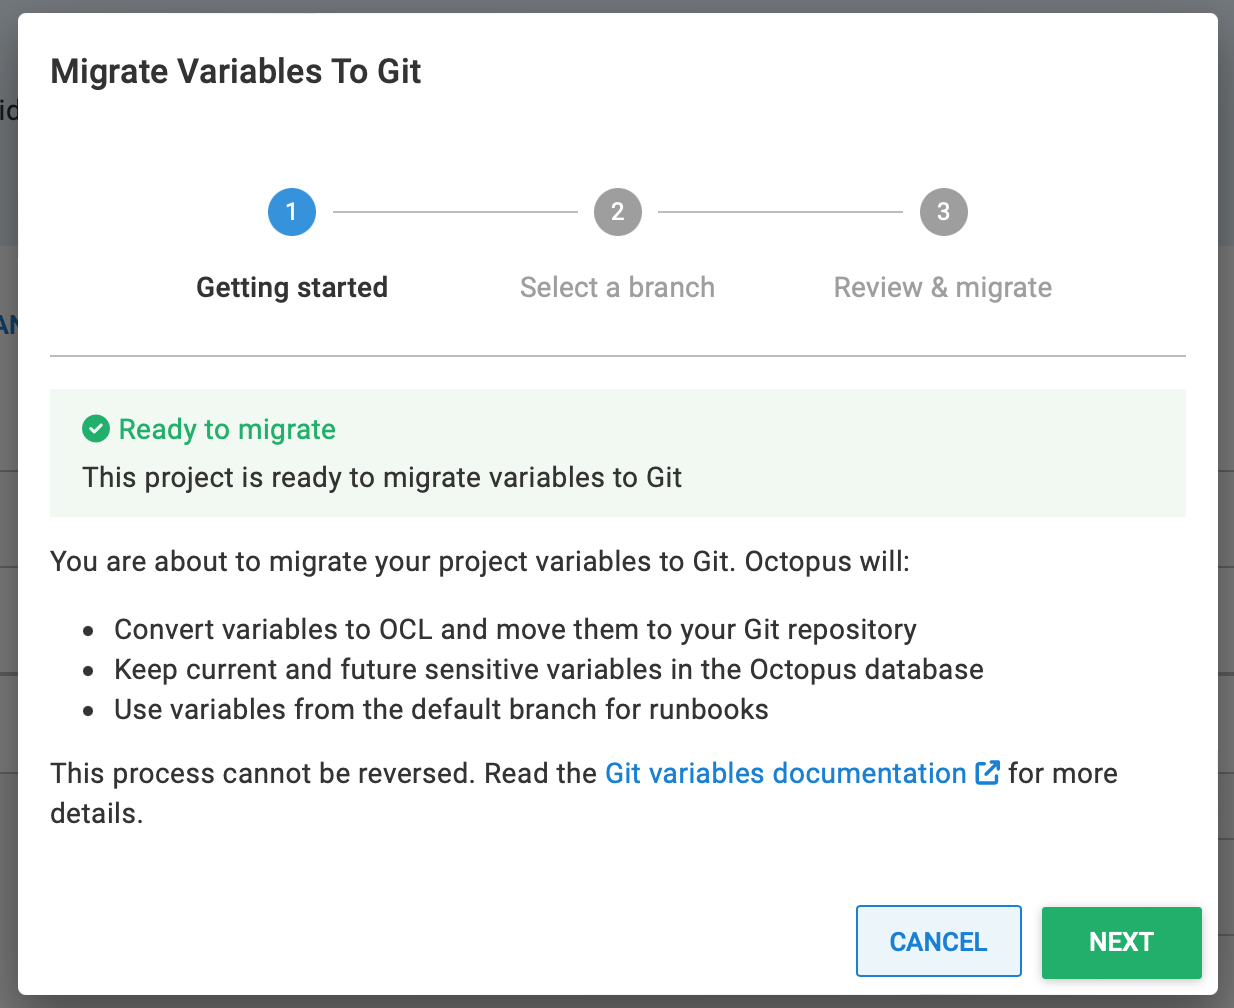 Screenshot of page 1 (getting started) on Git variables migration wizard